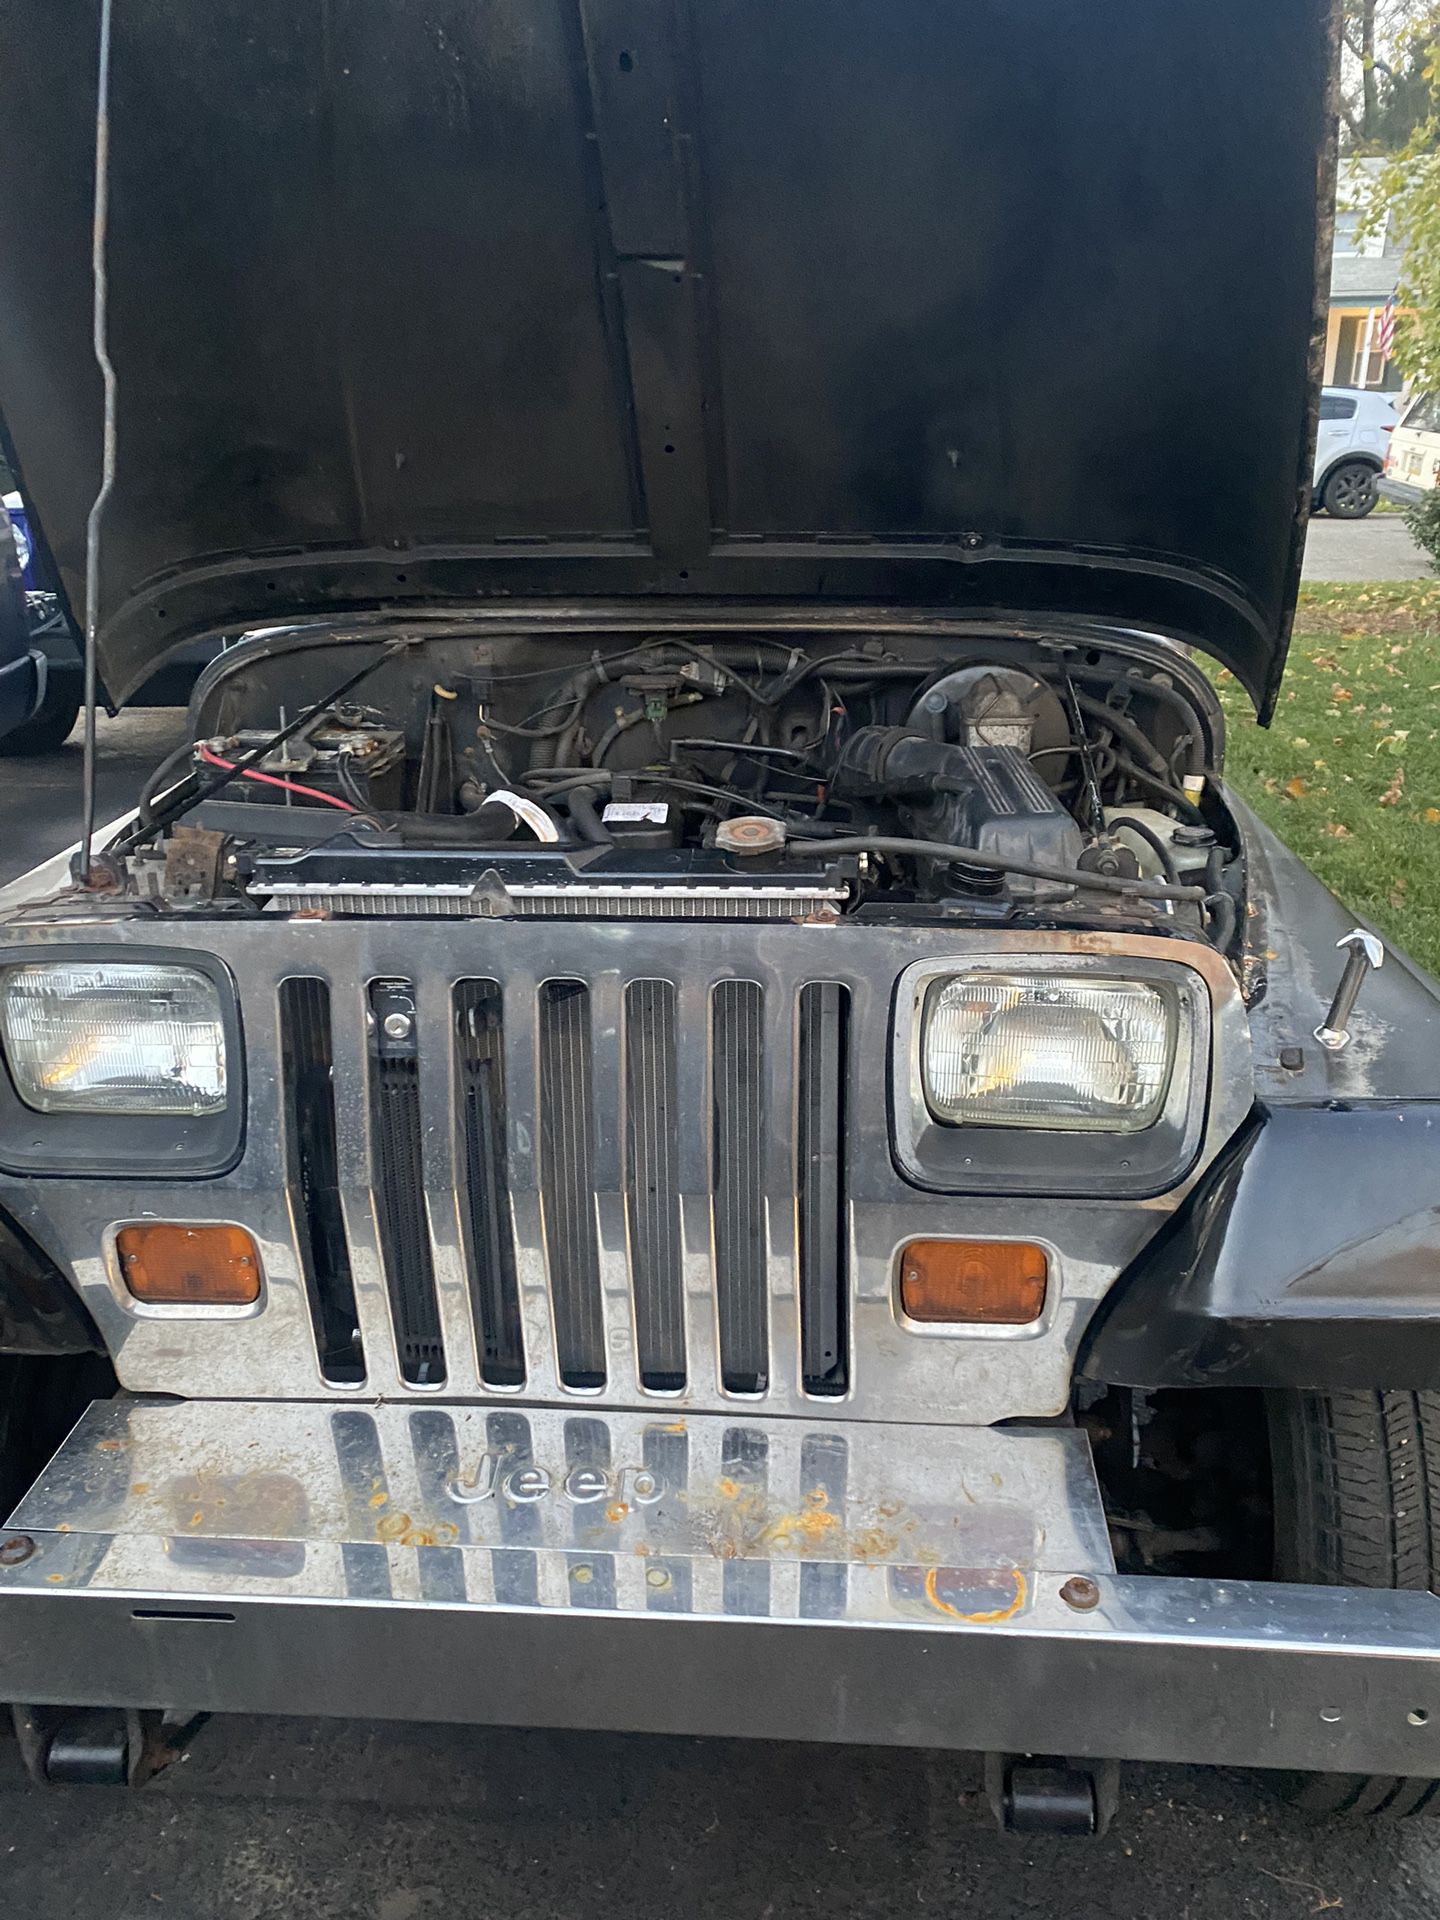 1995 Jeep Wrangler for Sale in Yardley, PA - OfferUp